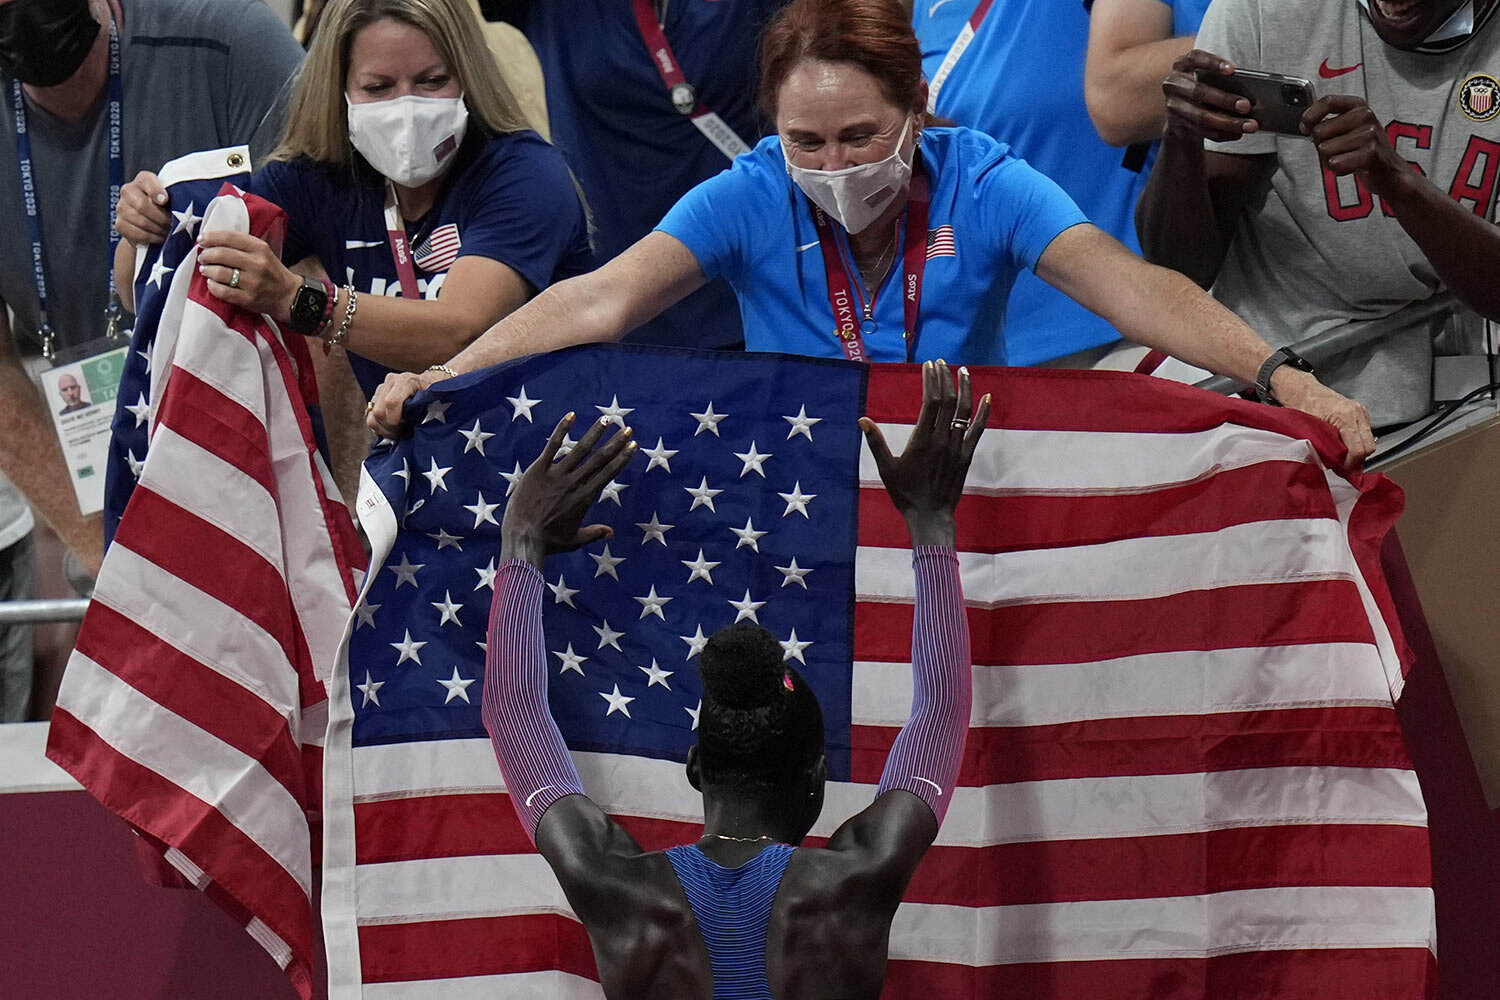  Athing Mu, of United States, celebrates after winning the final of the women's 800-meters at the 2020 Summer Olympics, Tuesday, Aug. 3, 2021, in Tokyo. (AP Photo/Petr David Josek) 